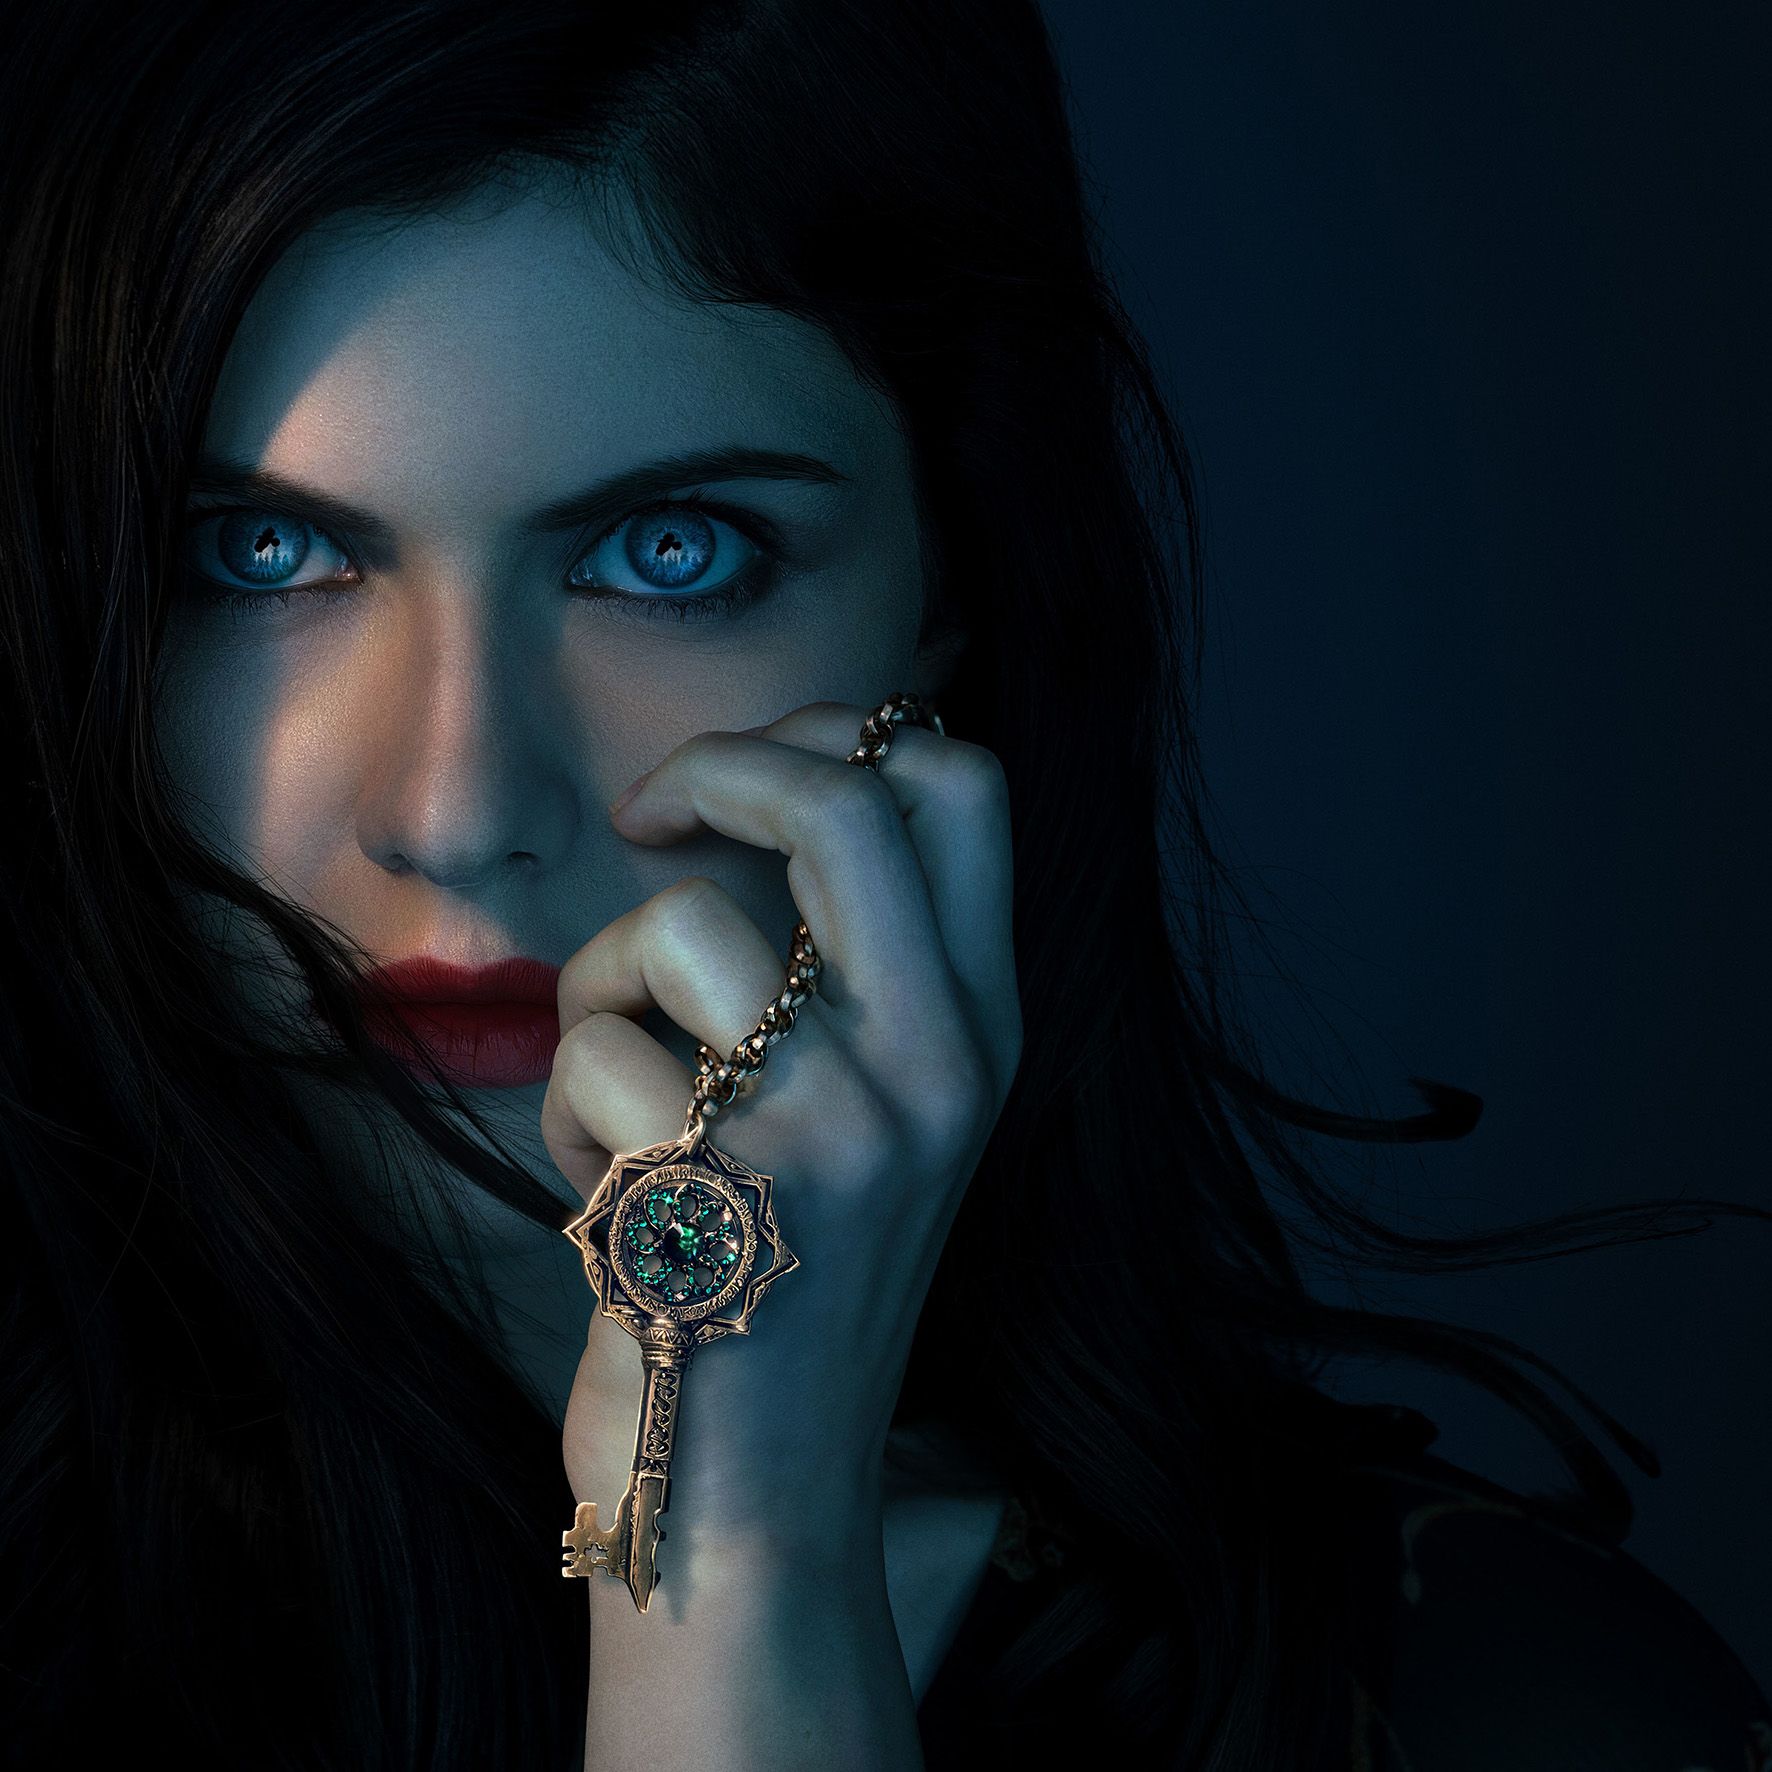 TV tonight: The White Lotus's Alexandra Daddario stars in a silly